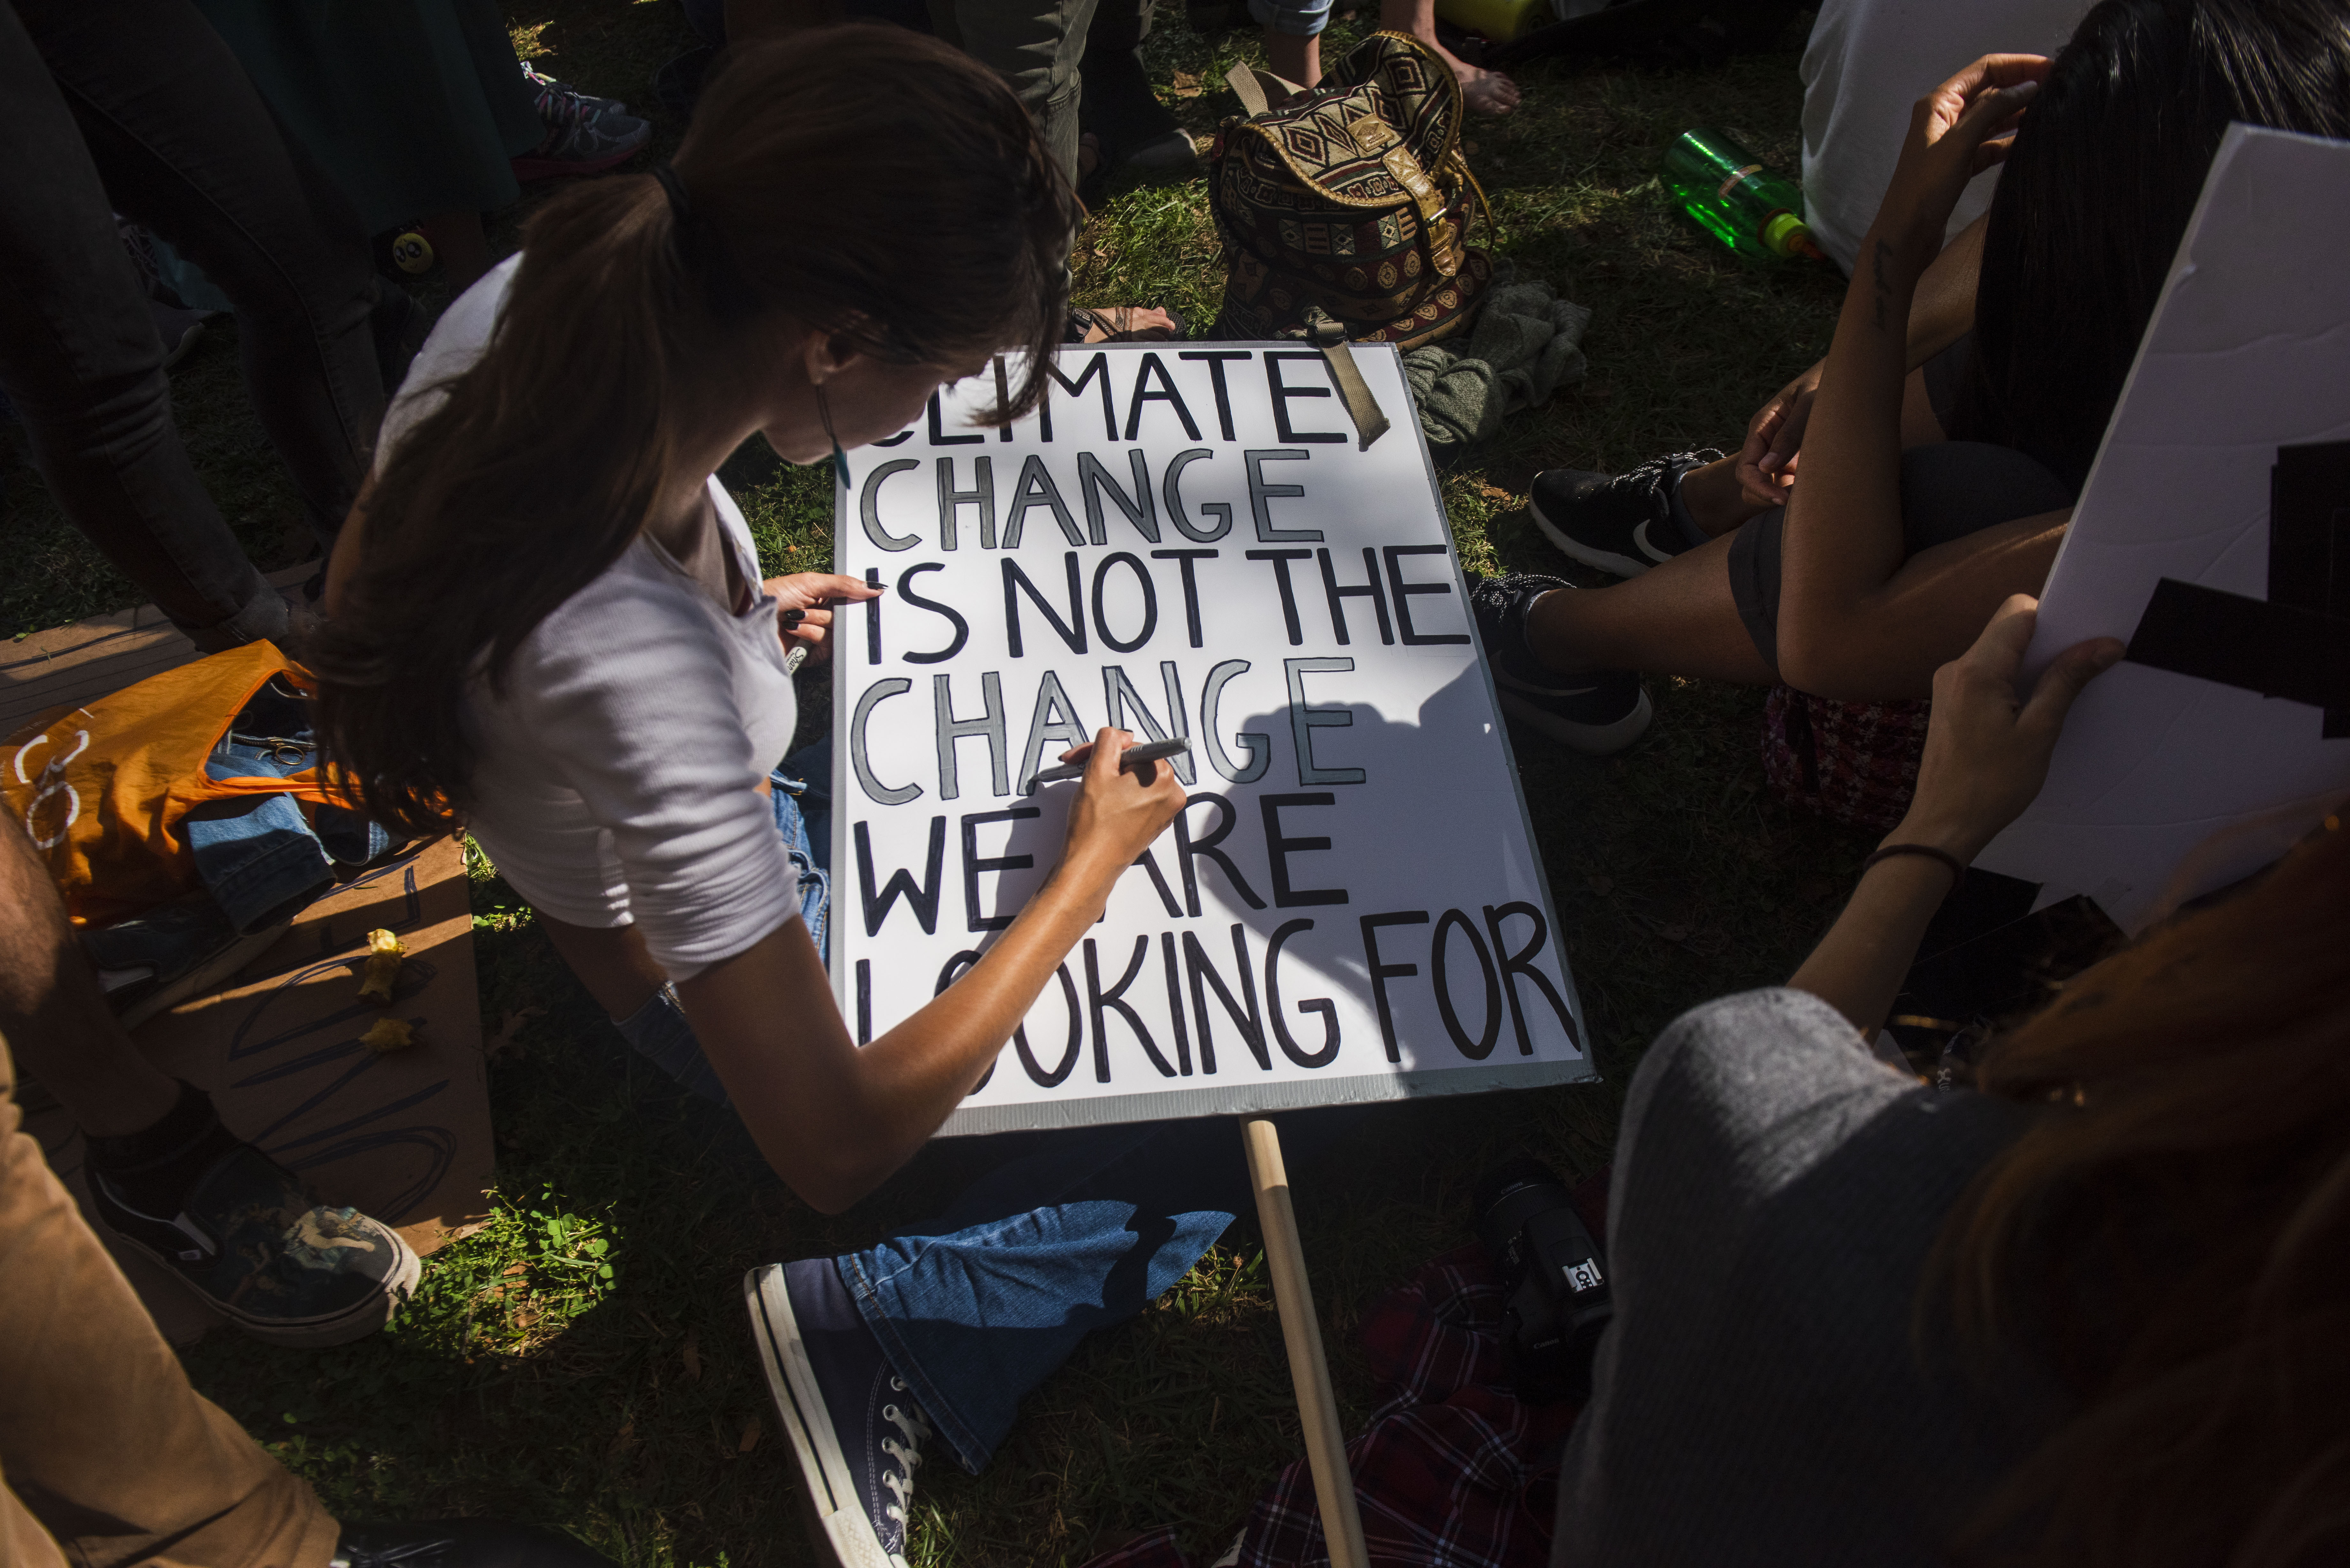 Scenes from the 20 September 2019 demonstration in downtown New York as part of the youth-lead global #ClimateStrike. Photo: UN Women/Amanda Voisard